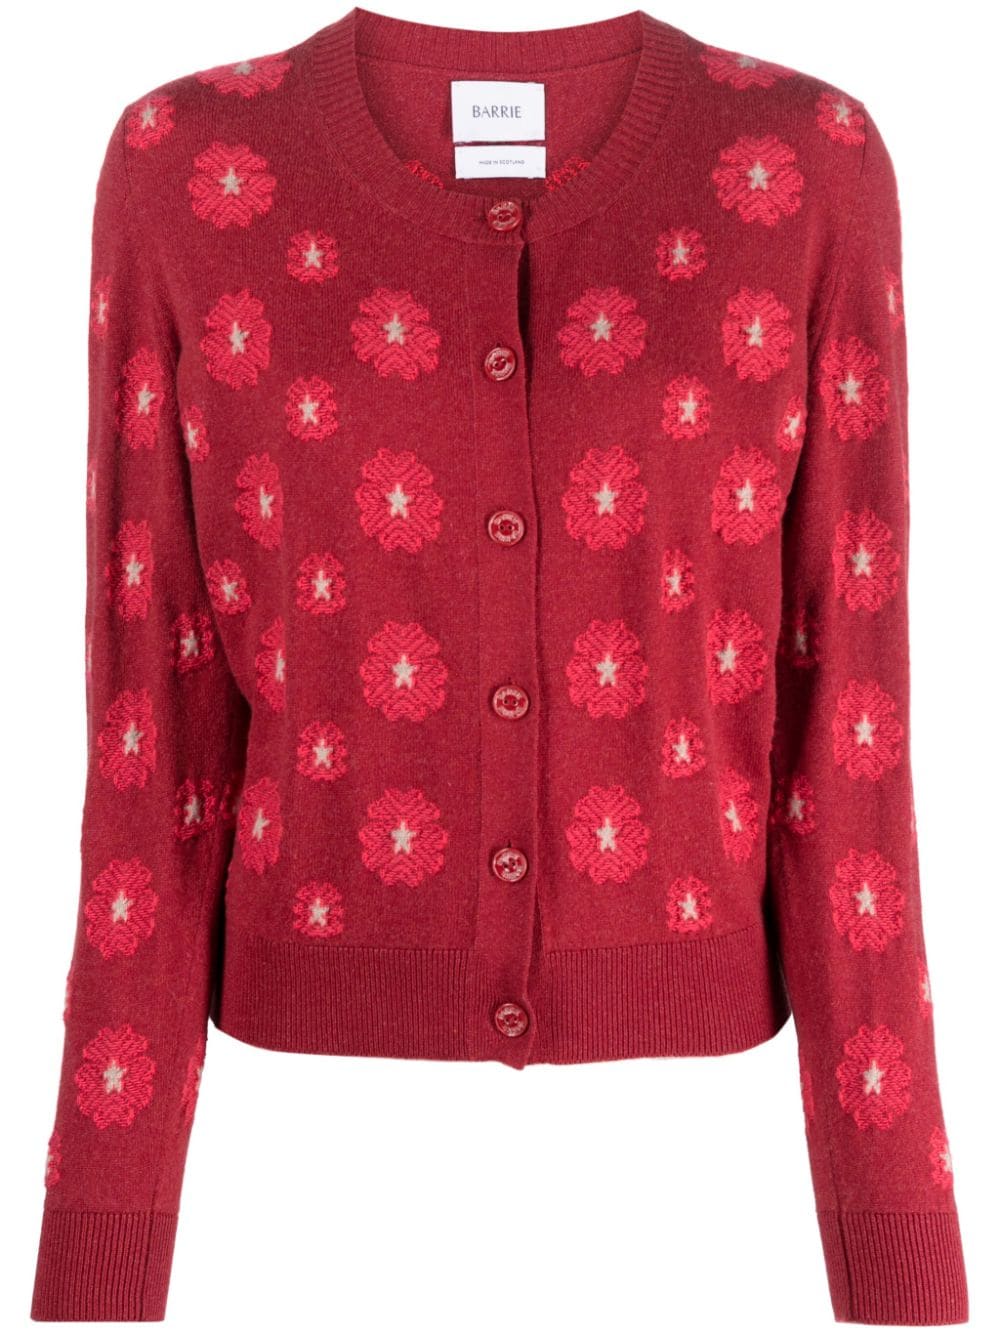 Barrie floral-embroidered cardigan von Barrie